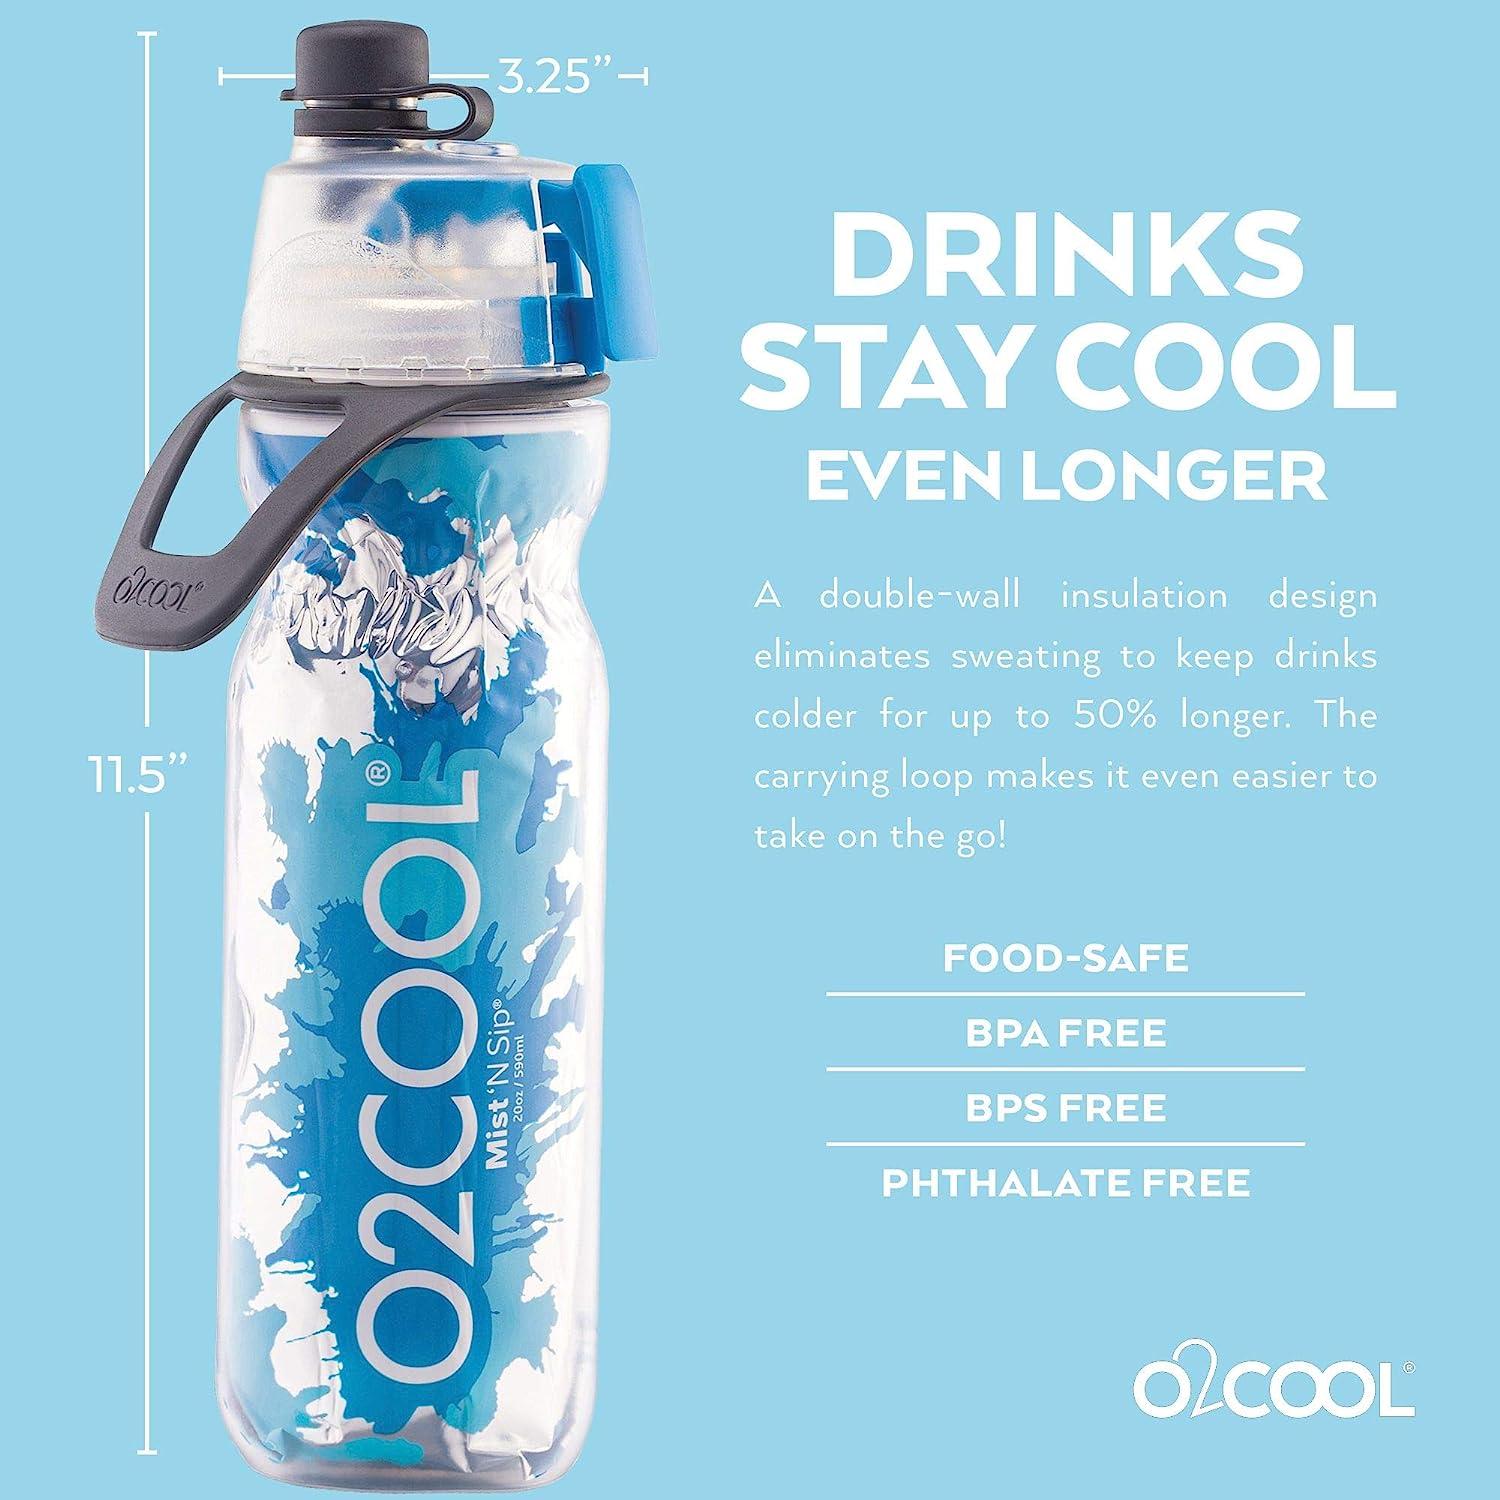 O2COOL Mist 'N Sip Misting Water Bottle 2-in-1 Mist and Sip Function with  No Leak Pull Top Spout Spo…See more O2COOL Mist 'N Sip Misting Water Bottle